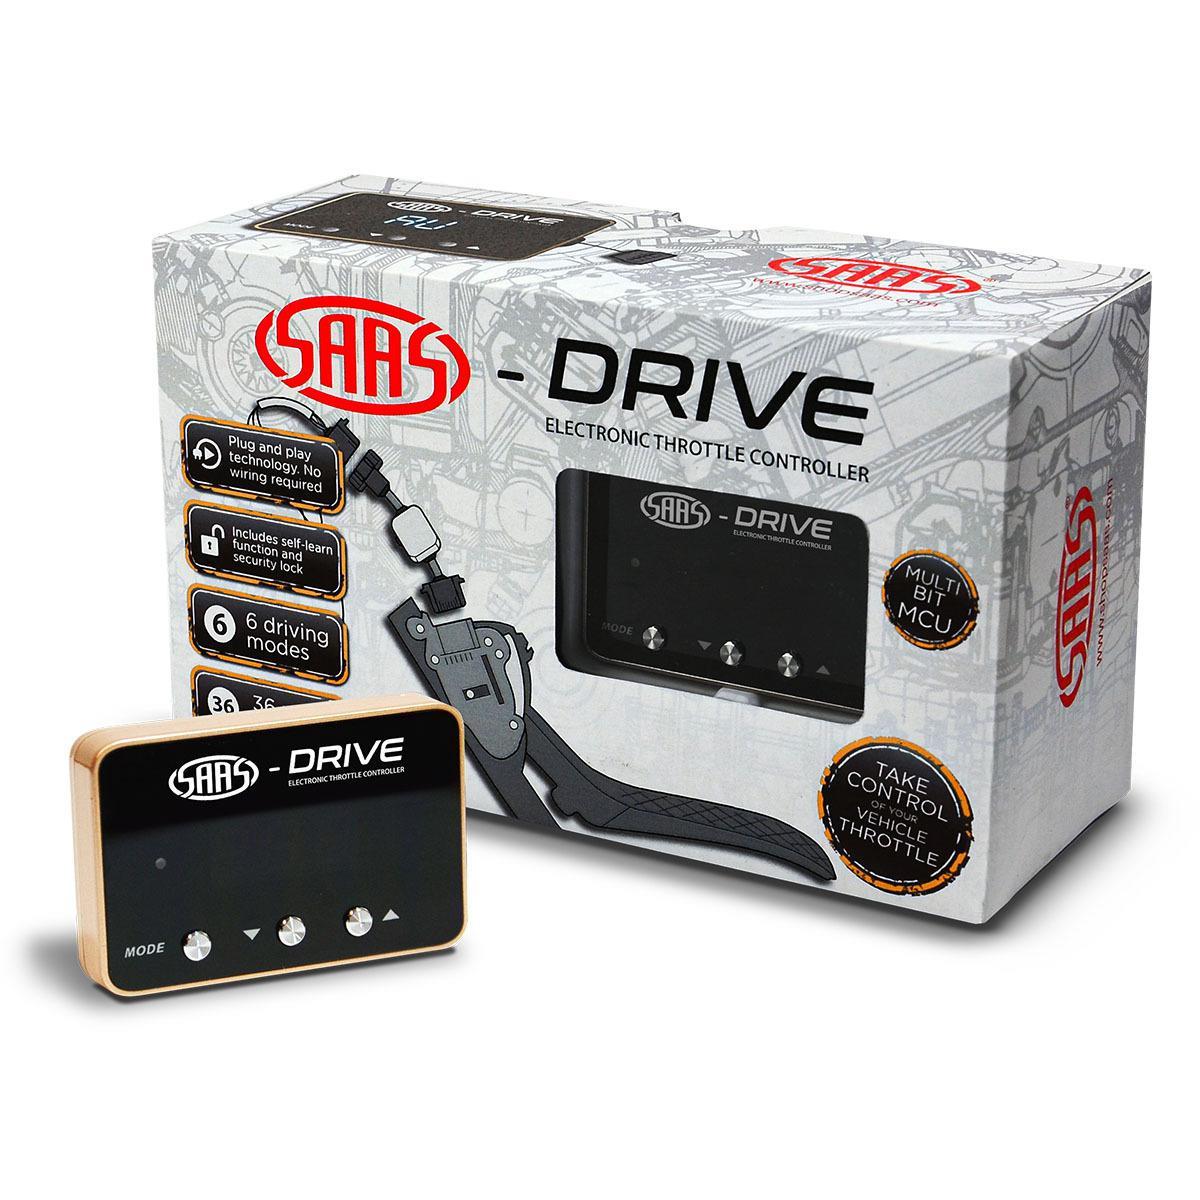 SAAS-Drive Throttle Controller For Audi RS6 C6 Typ 4F 2008-2010